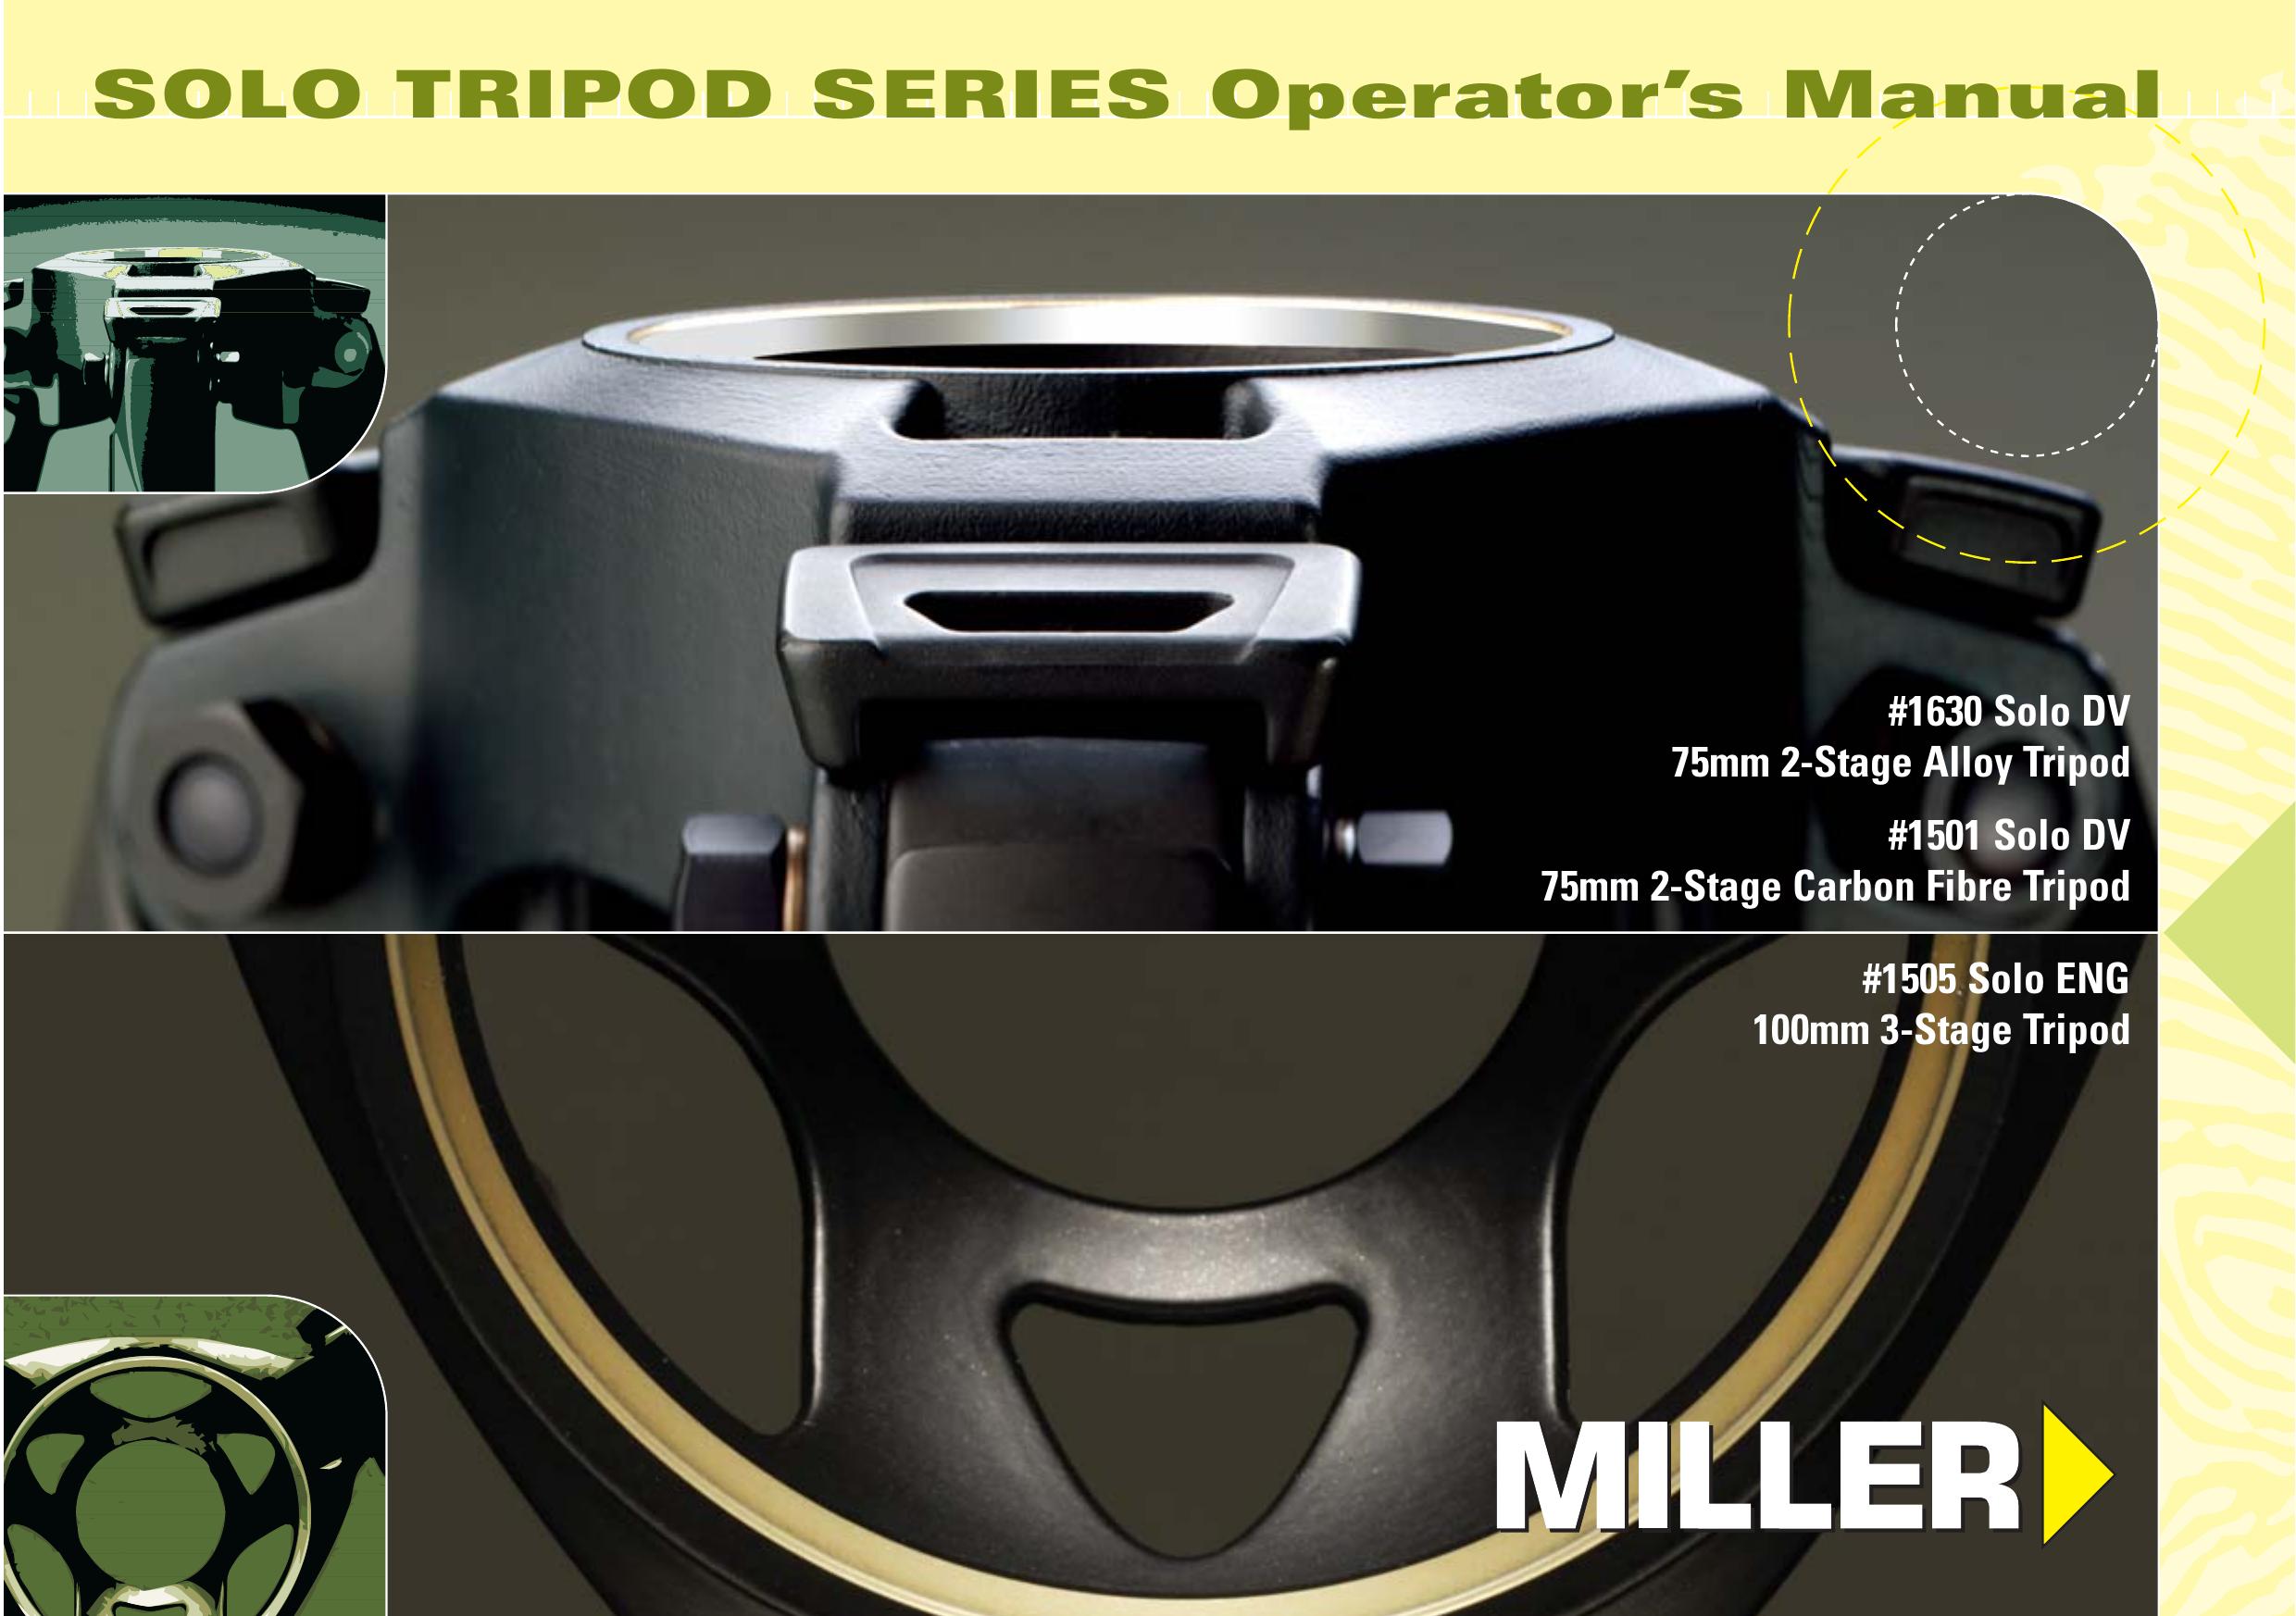 Miller Camera Support 1630 Camcorder Accessories User Manual